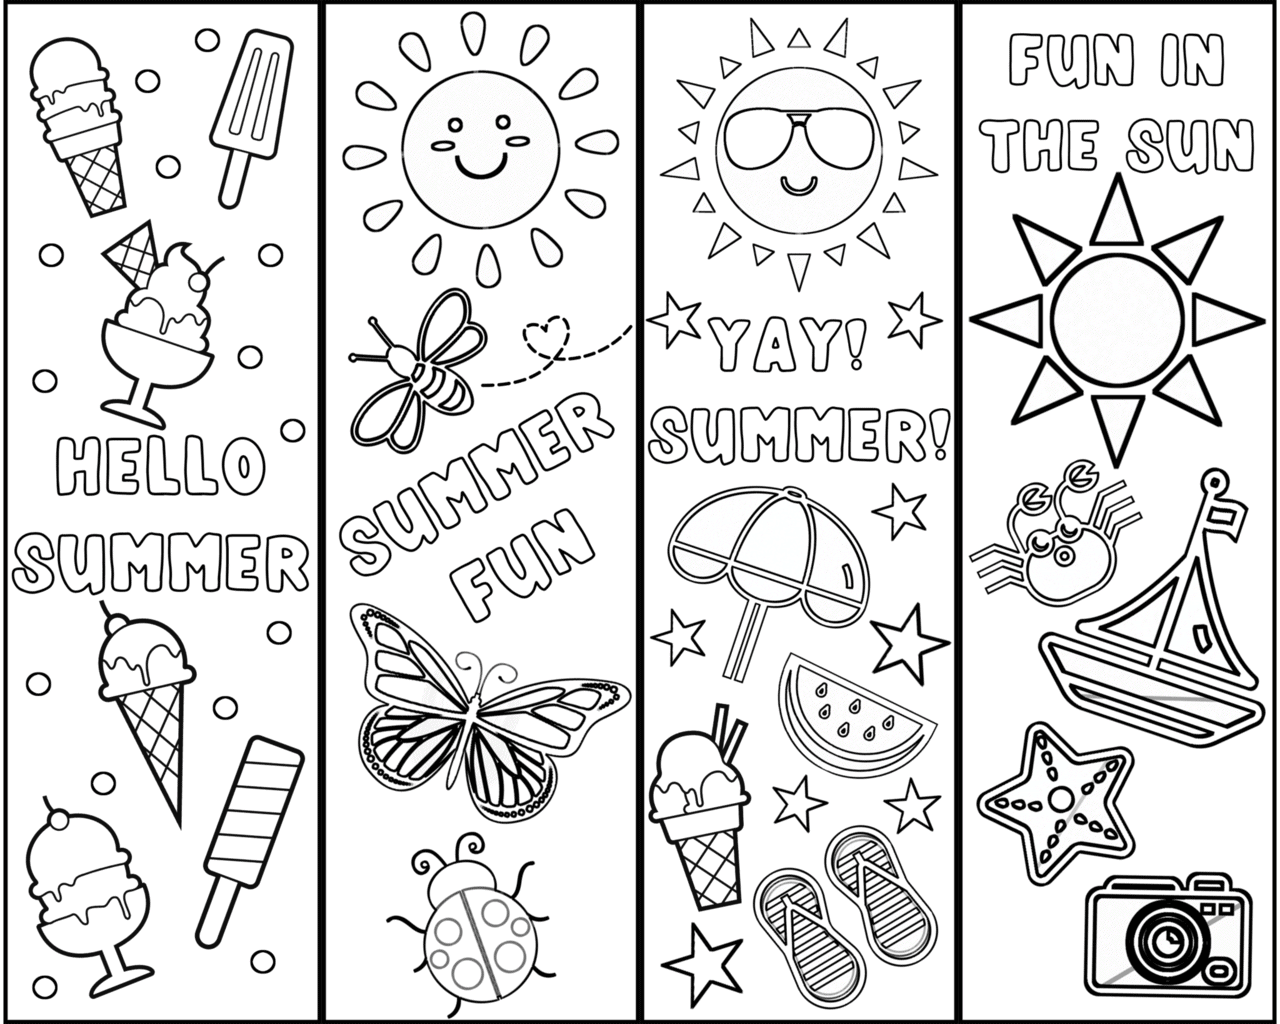 Cute Free Printable Bookmarks To Color For Kids (Summer Fun) Cassie